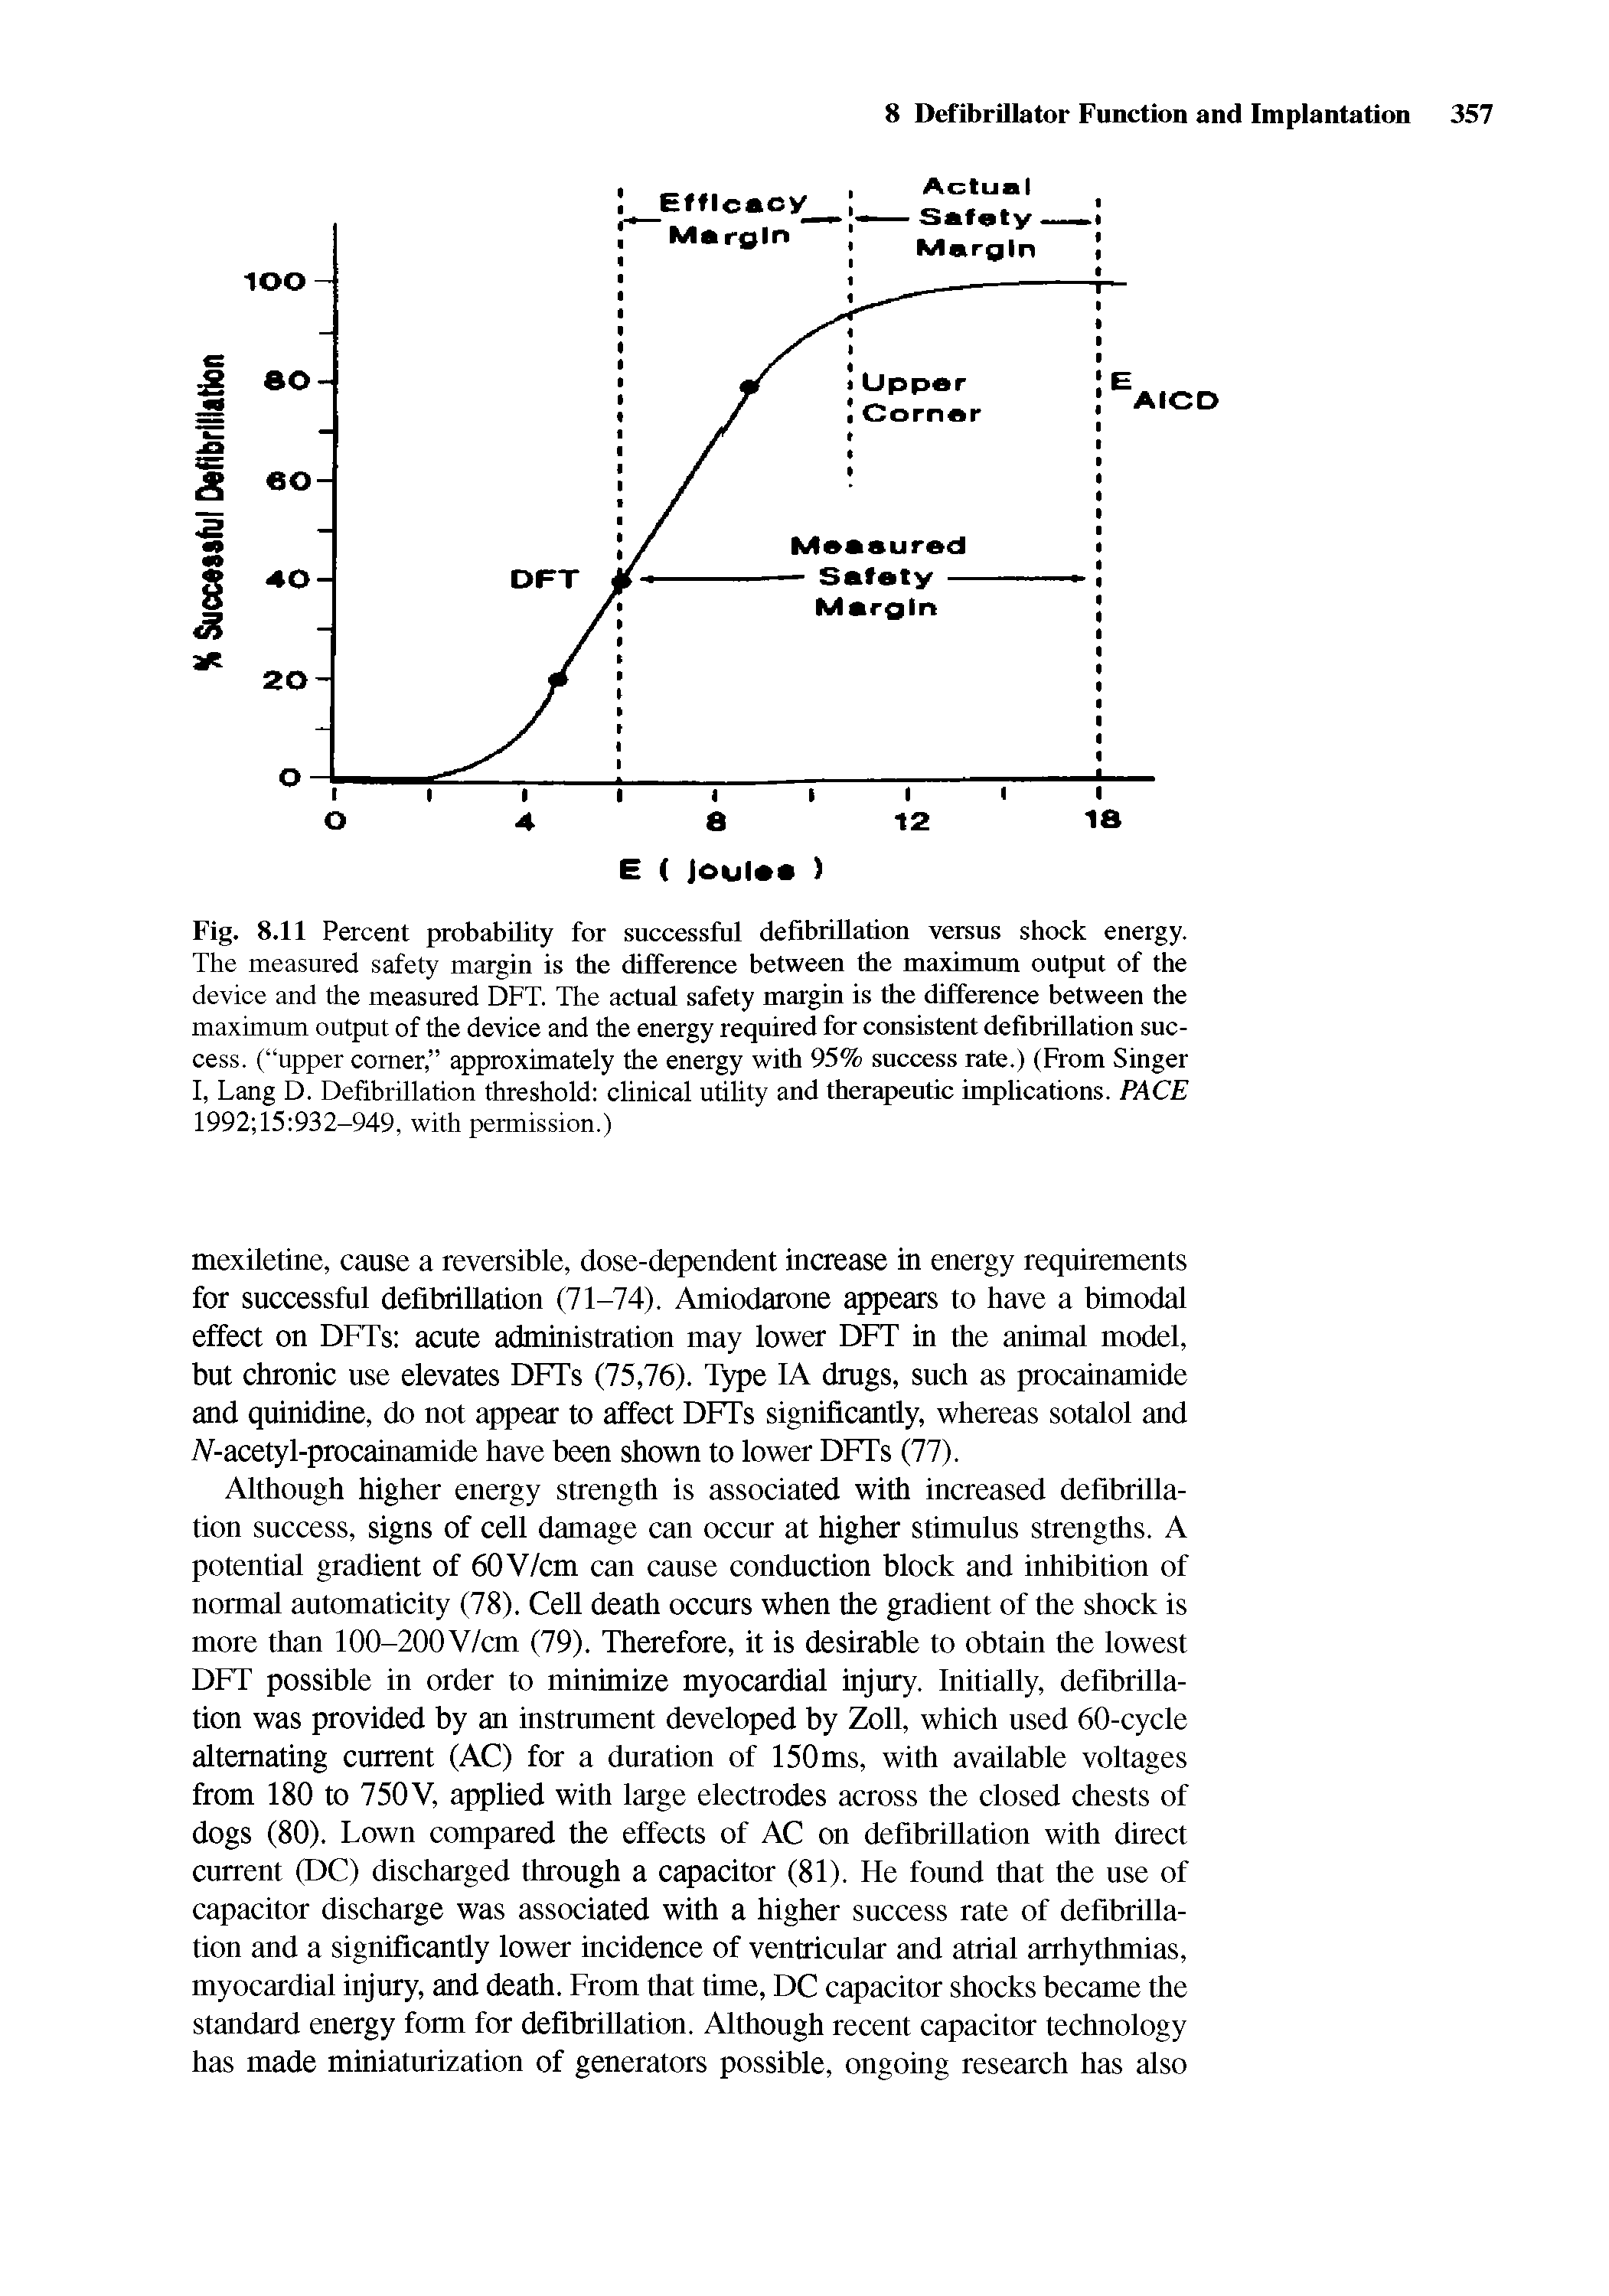 Fig. 8.11 Percent probability for successful defibrillation versus shock energy. The measured safety margin is the difference between the maximum output of the device and the measured DPT. The actual safety margin is the difference between the maximum output of the device and the energy required for consistent defibrillation success. ( upper comer, approximately the energy with 95% success rate.) (From Singer I, Lang D. Defibrillation threshold clinical utility and therapeutic implications. PACE 1992 15 932-949, with permission.)...